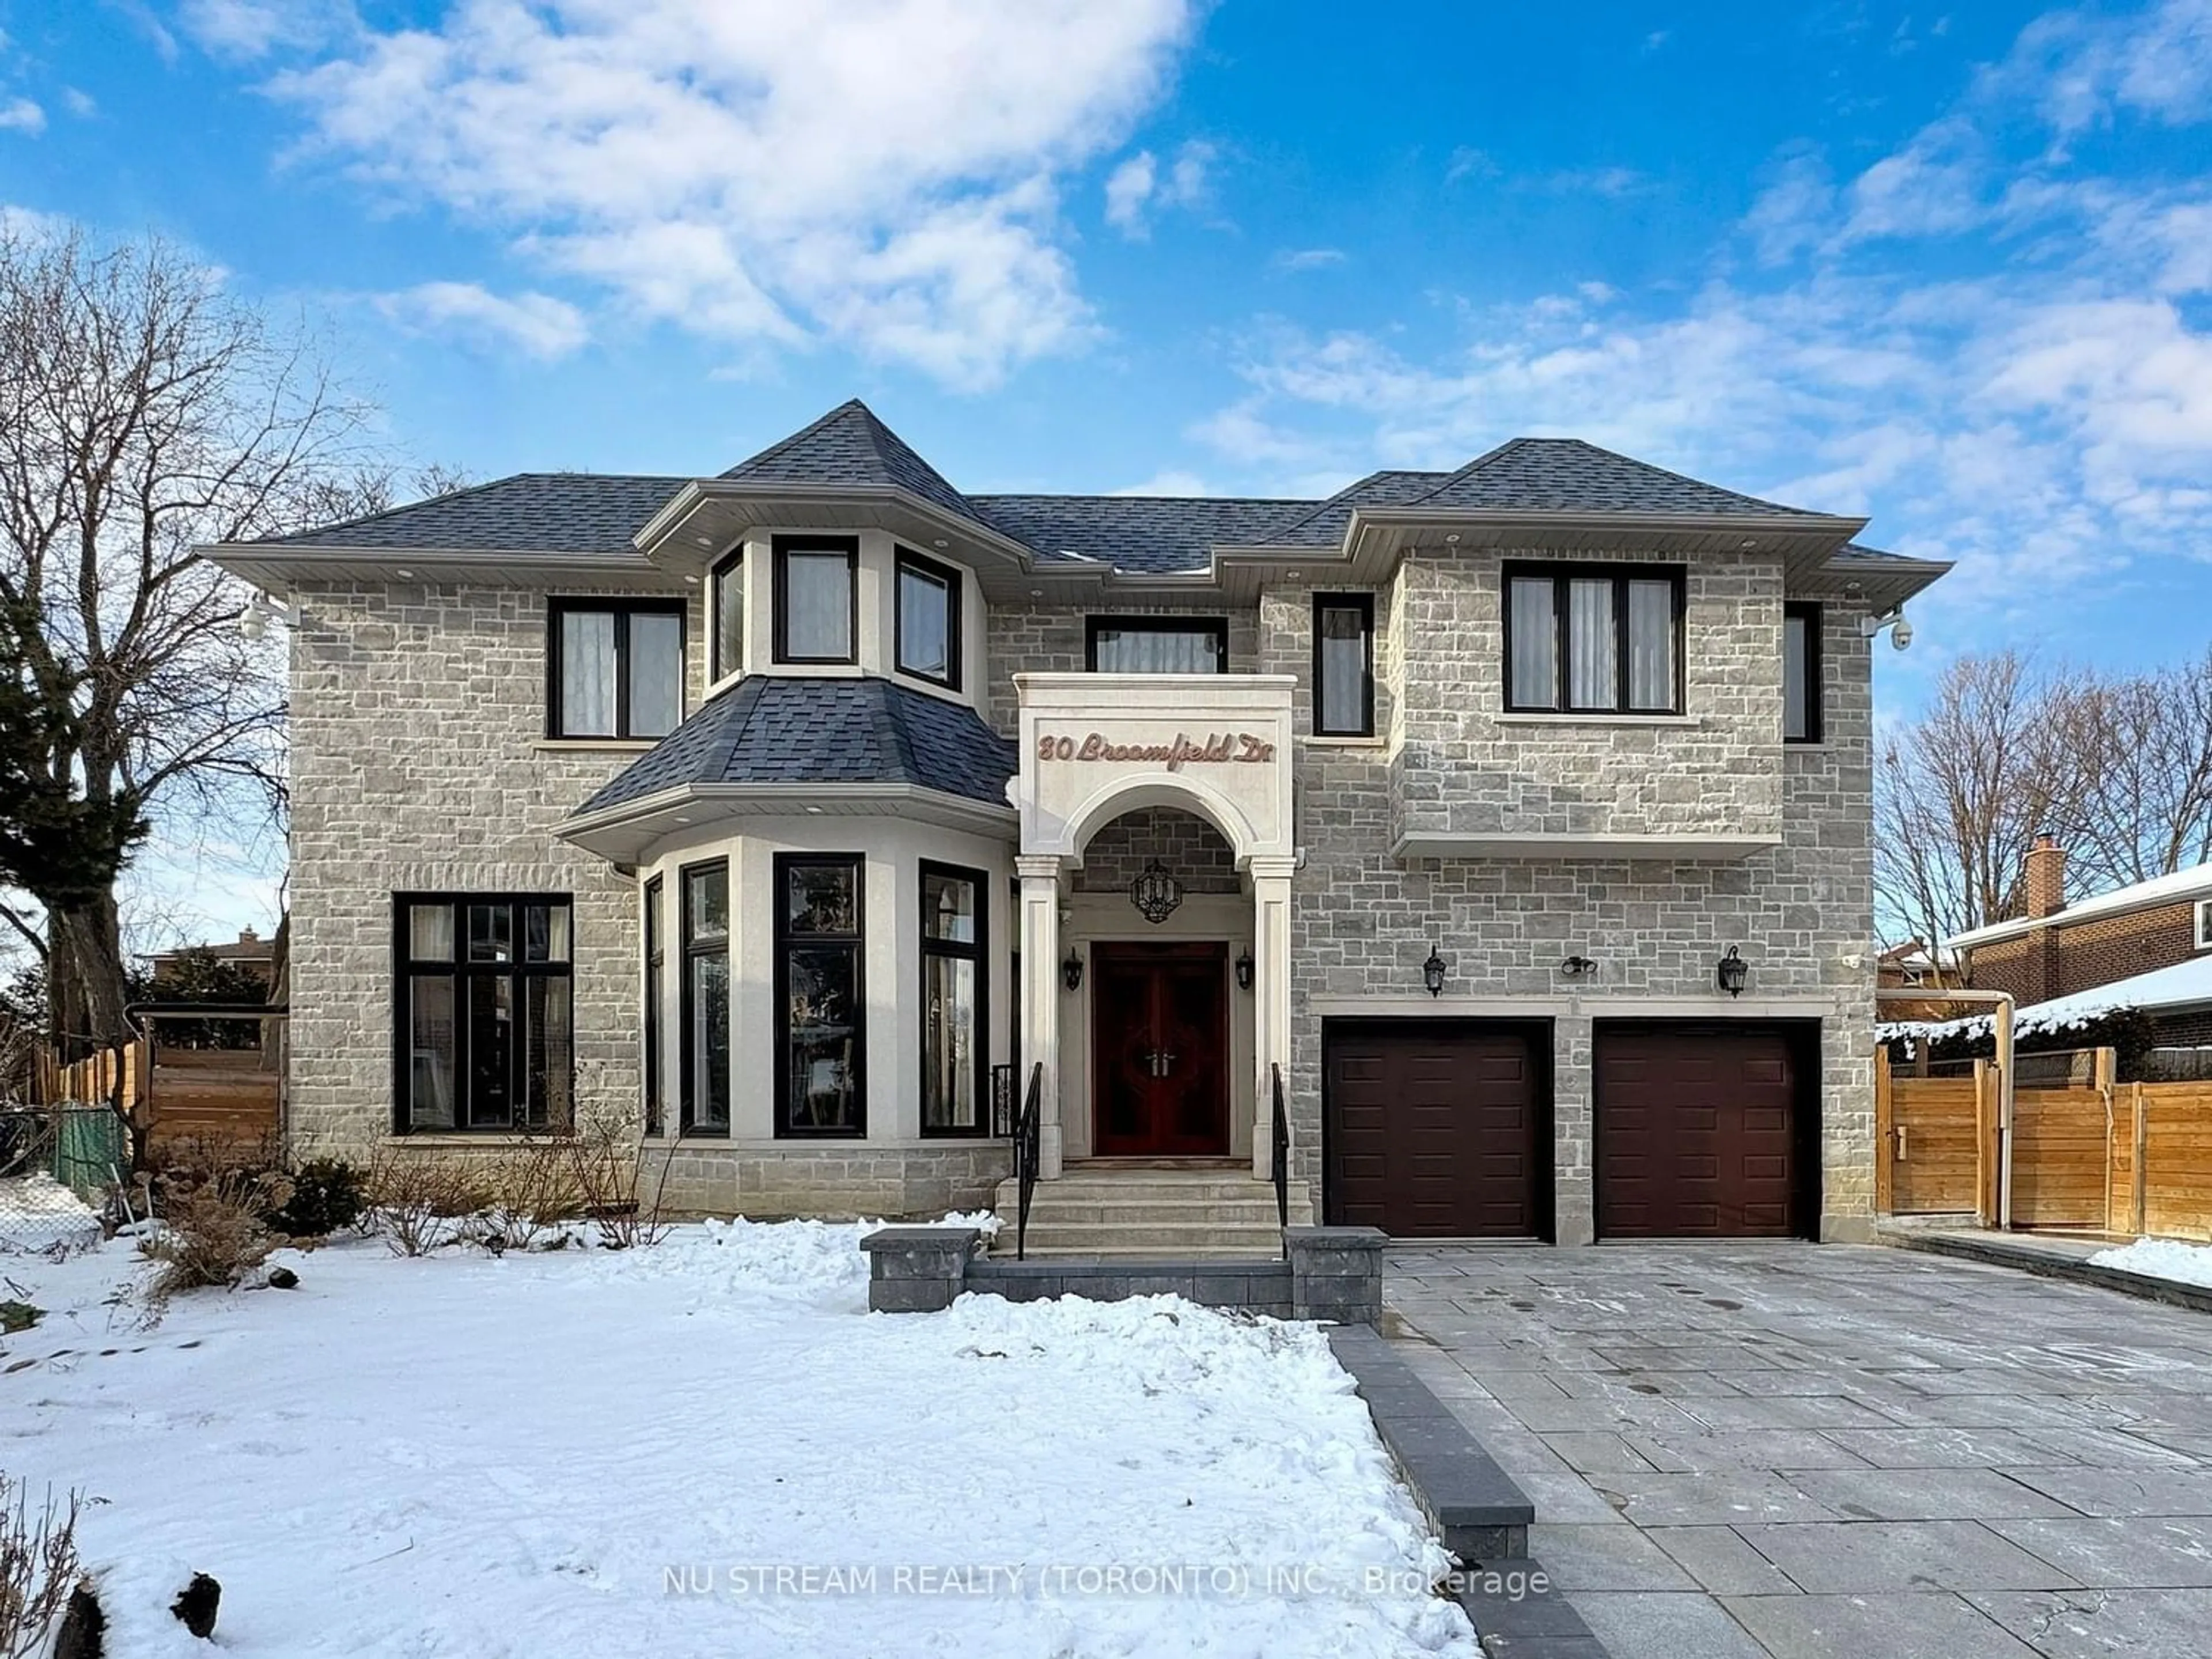 Home with brick exterior material for 80 Broomfield Dr, Toronto Ontario M1S 2W1